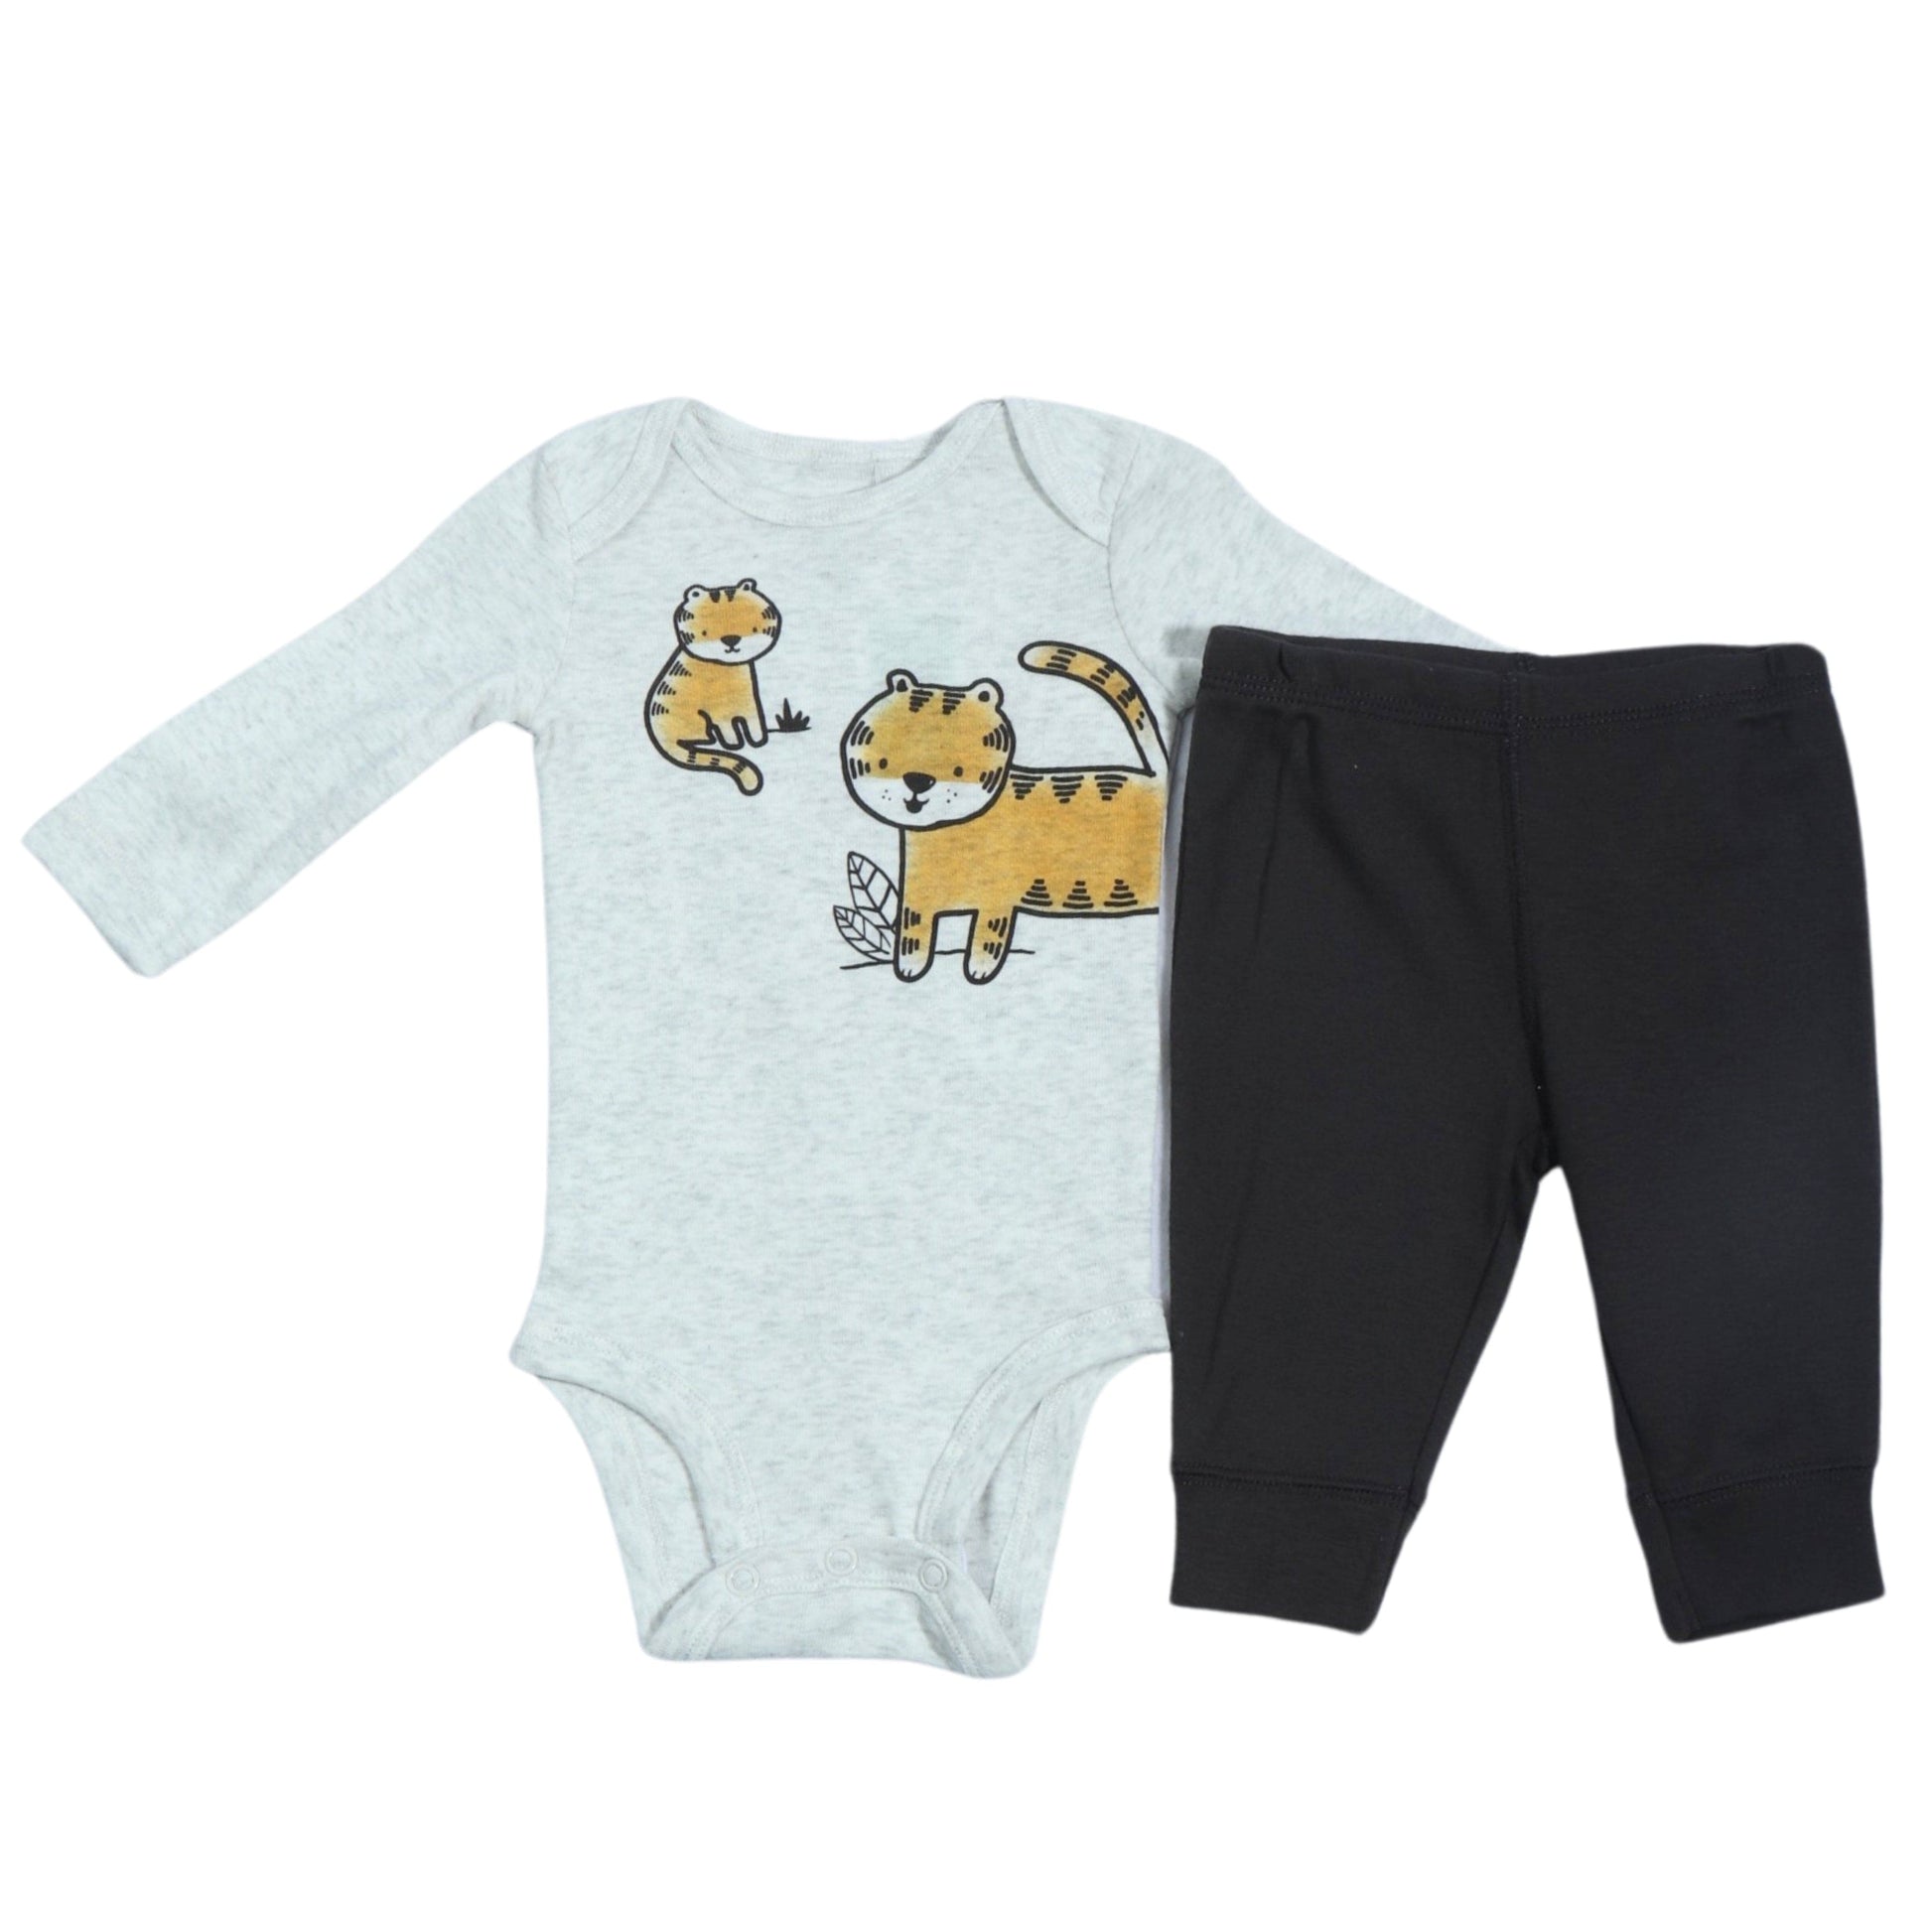 CARTER'S Baby Boy 3 Month / Multi-Color CARTER'S - BABY - Bodysuit And Pant Set